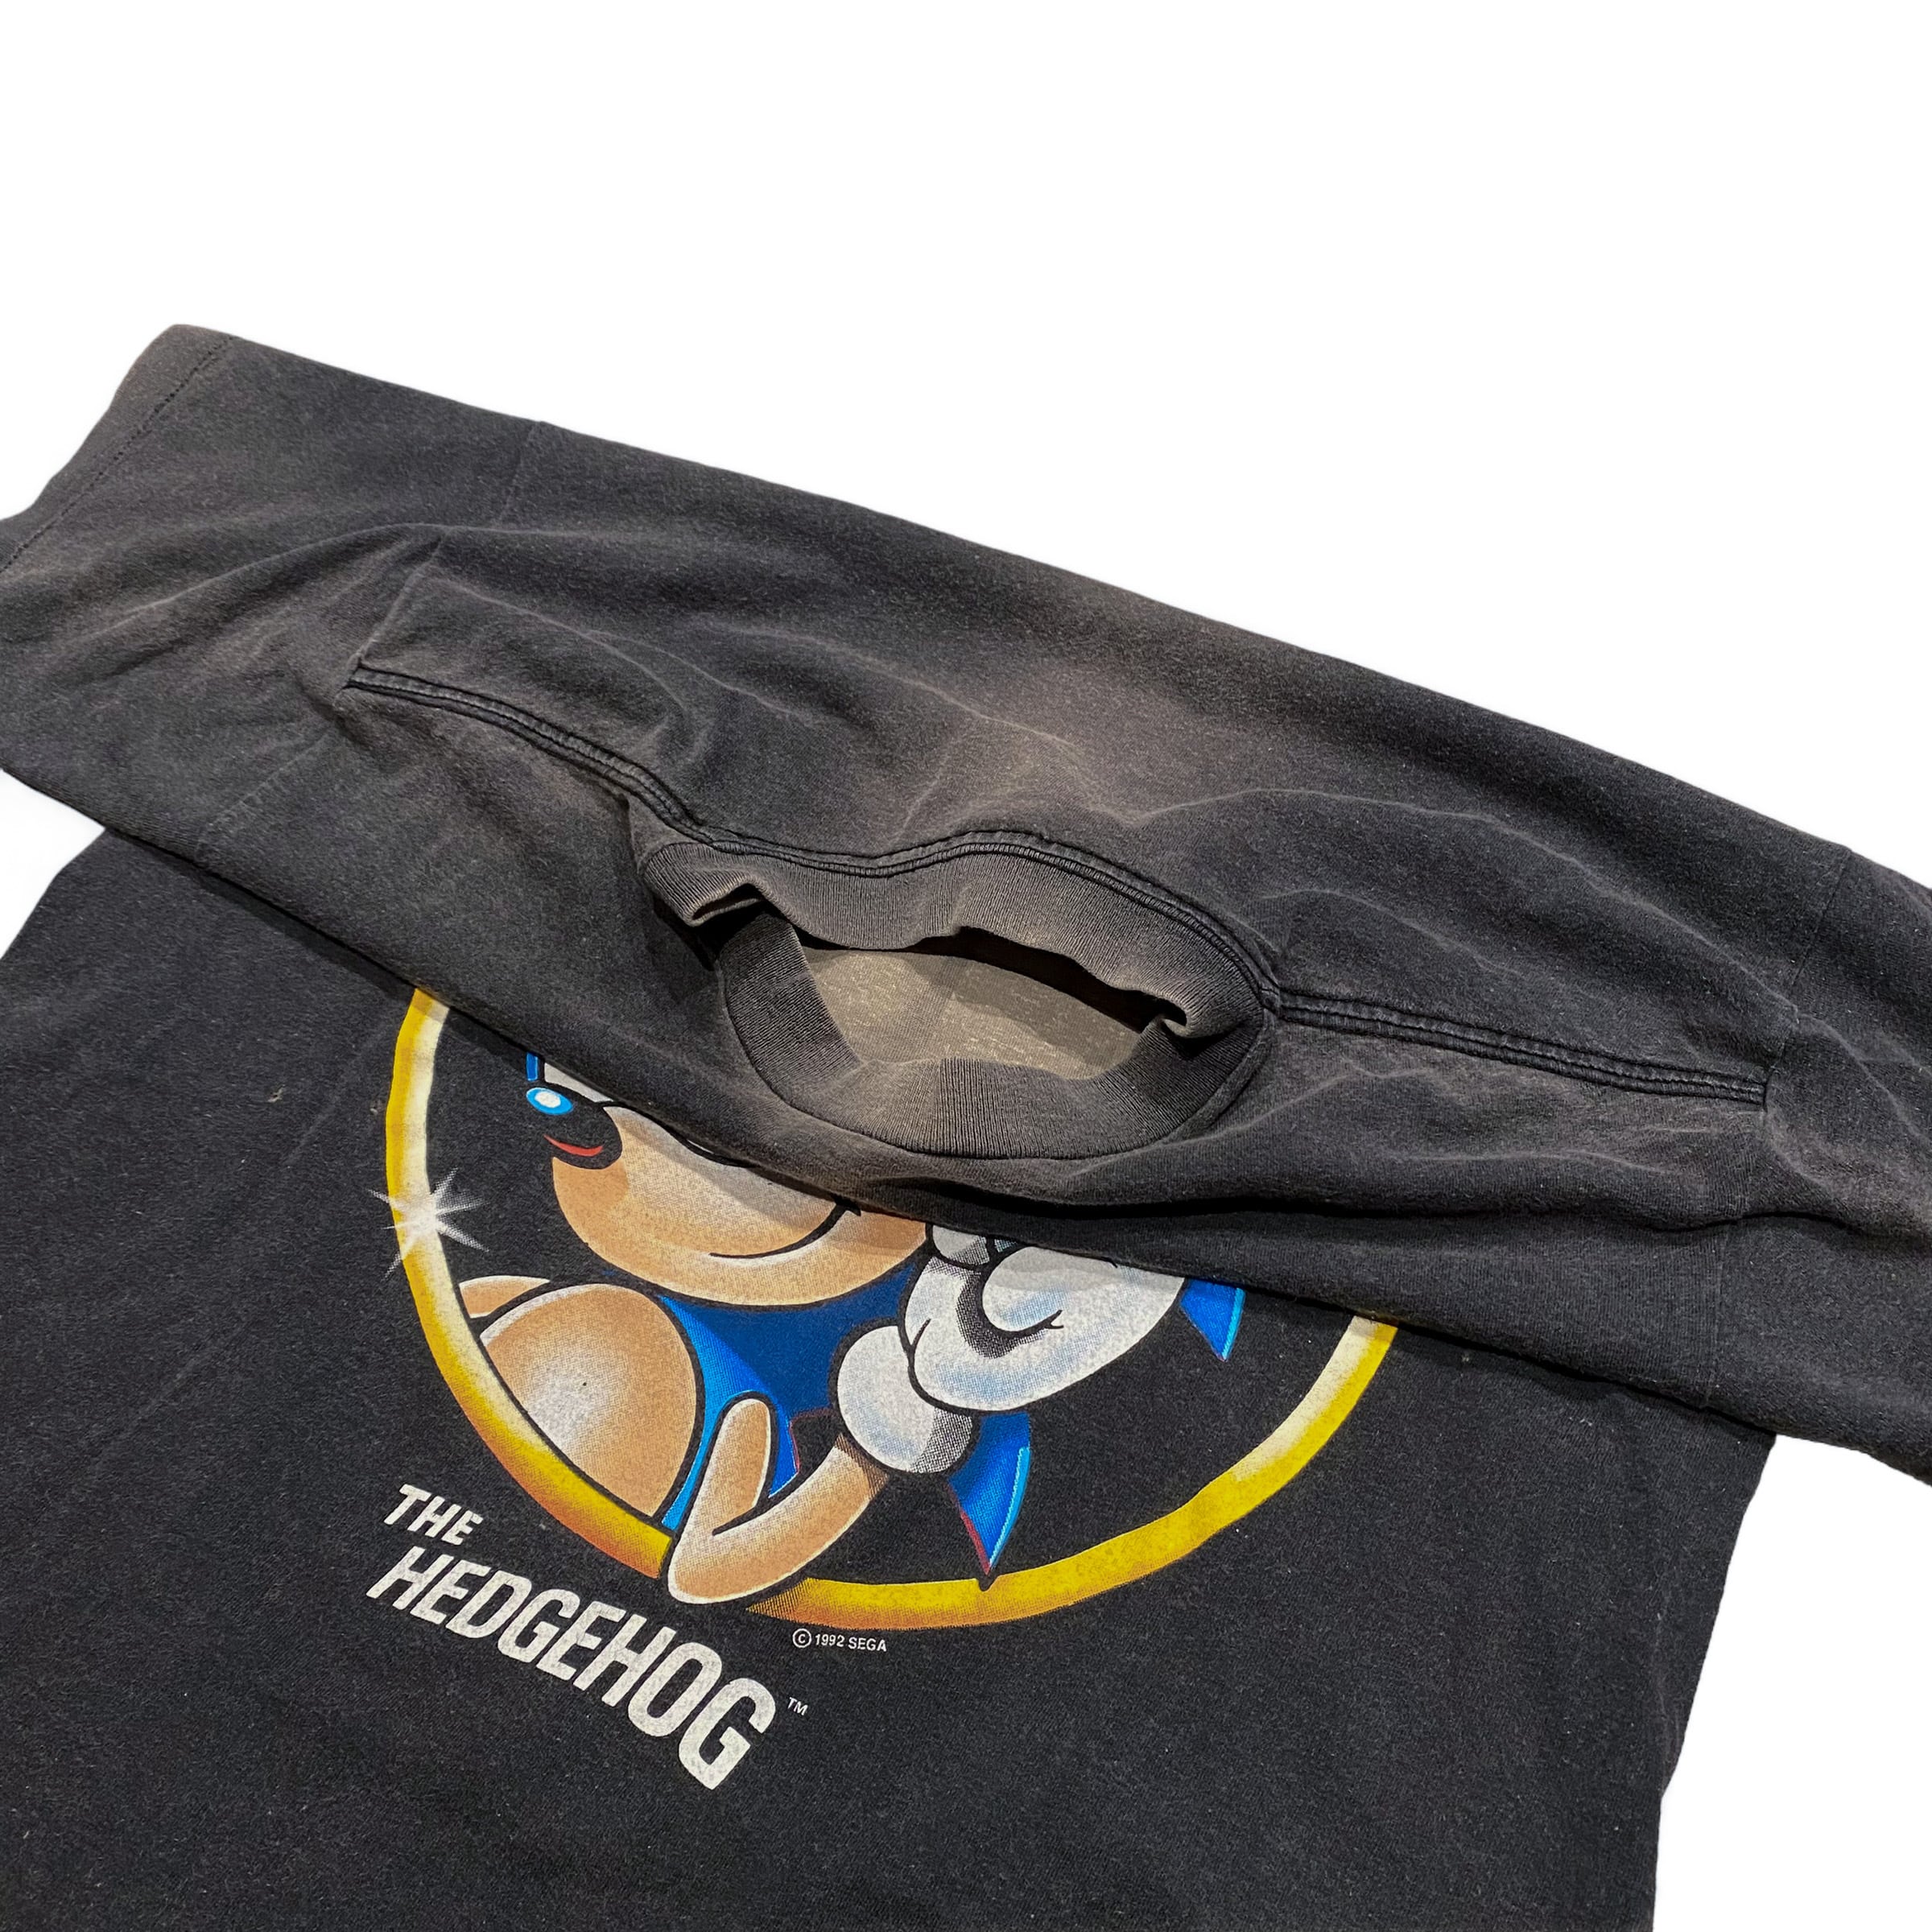 90's USA製 SONIC THE HEDGEHOG Printed T-Shirt M / ソニック Tシャツ ゲーム キャラクター プリント  古着 ヴィンテージ